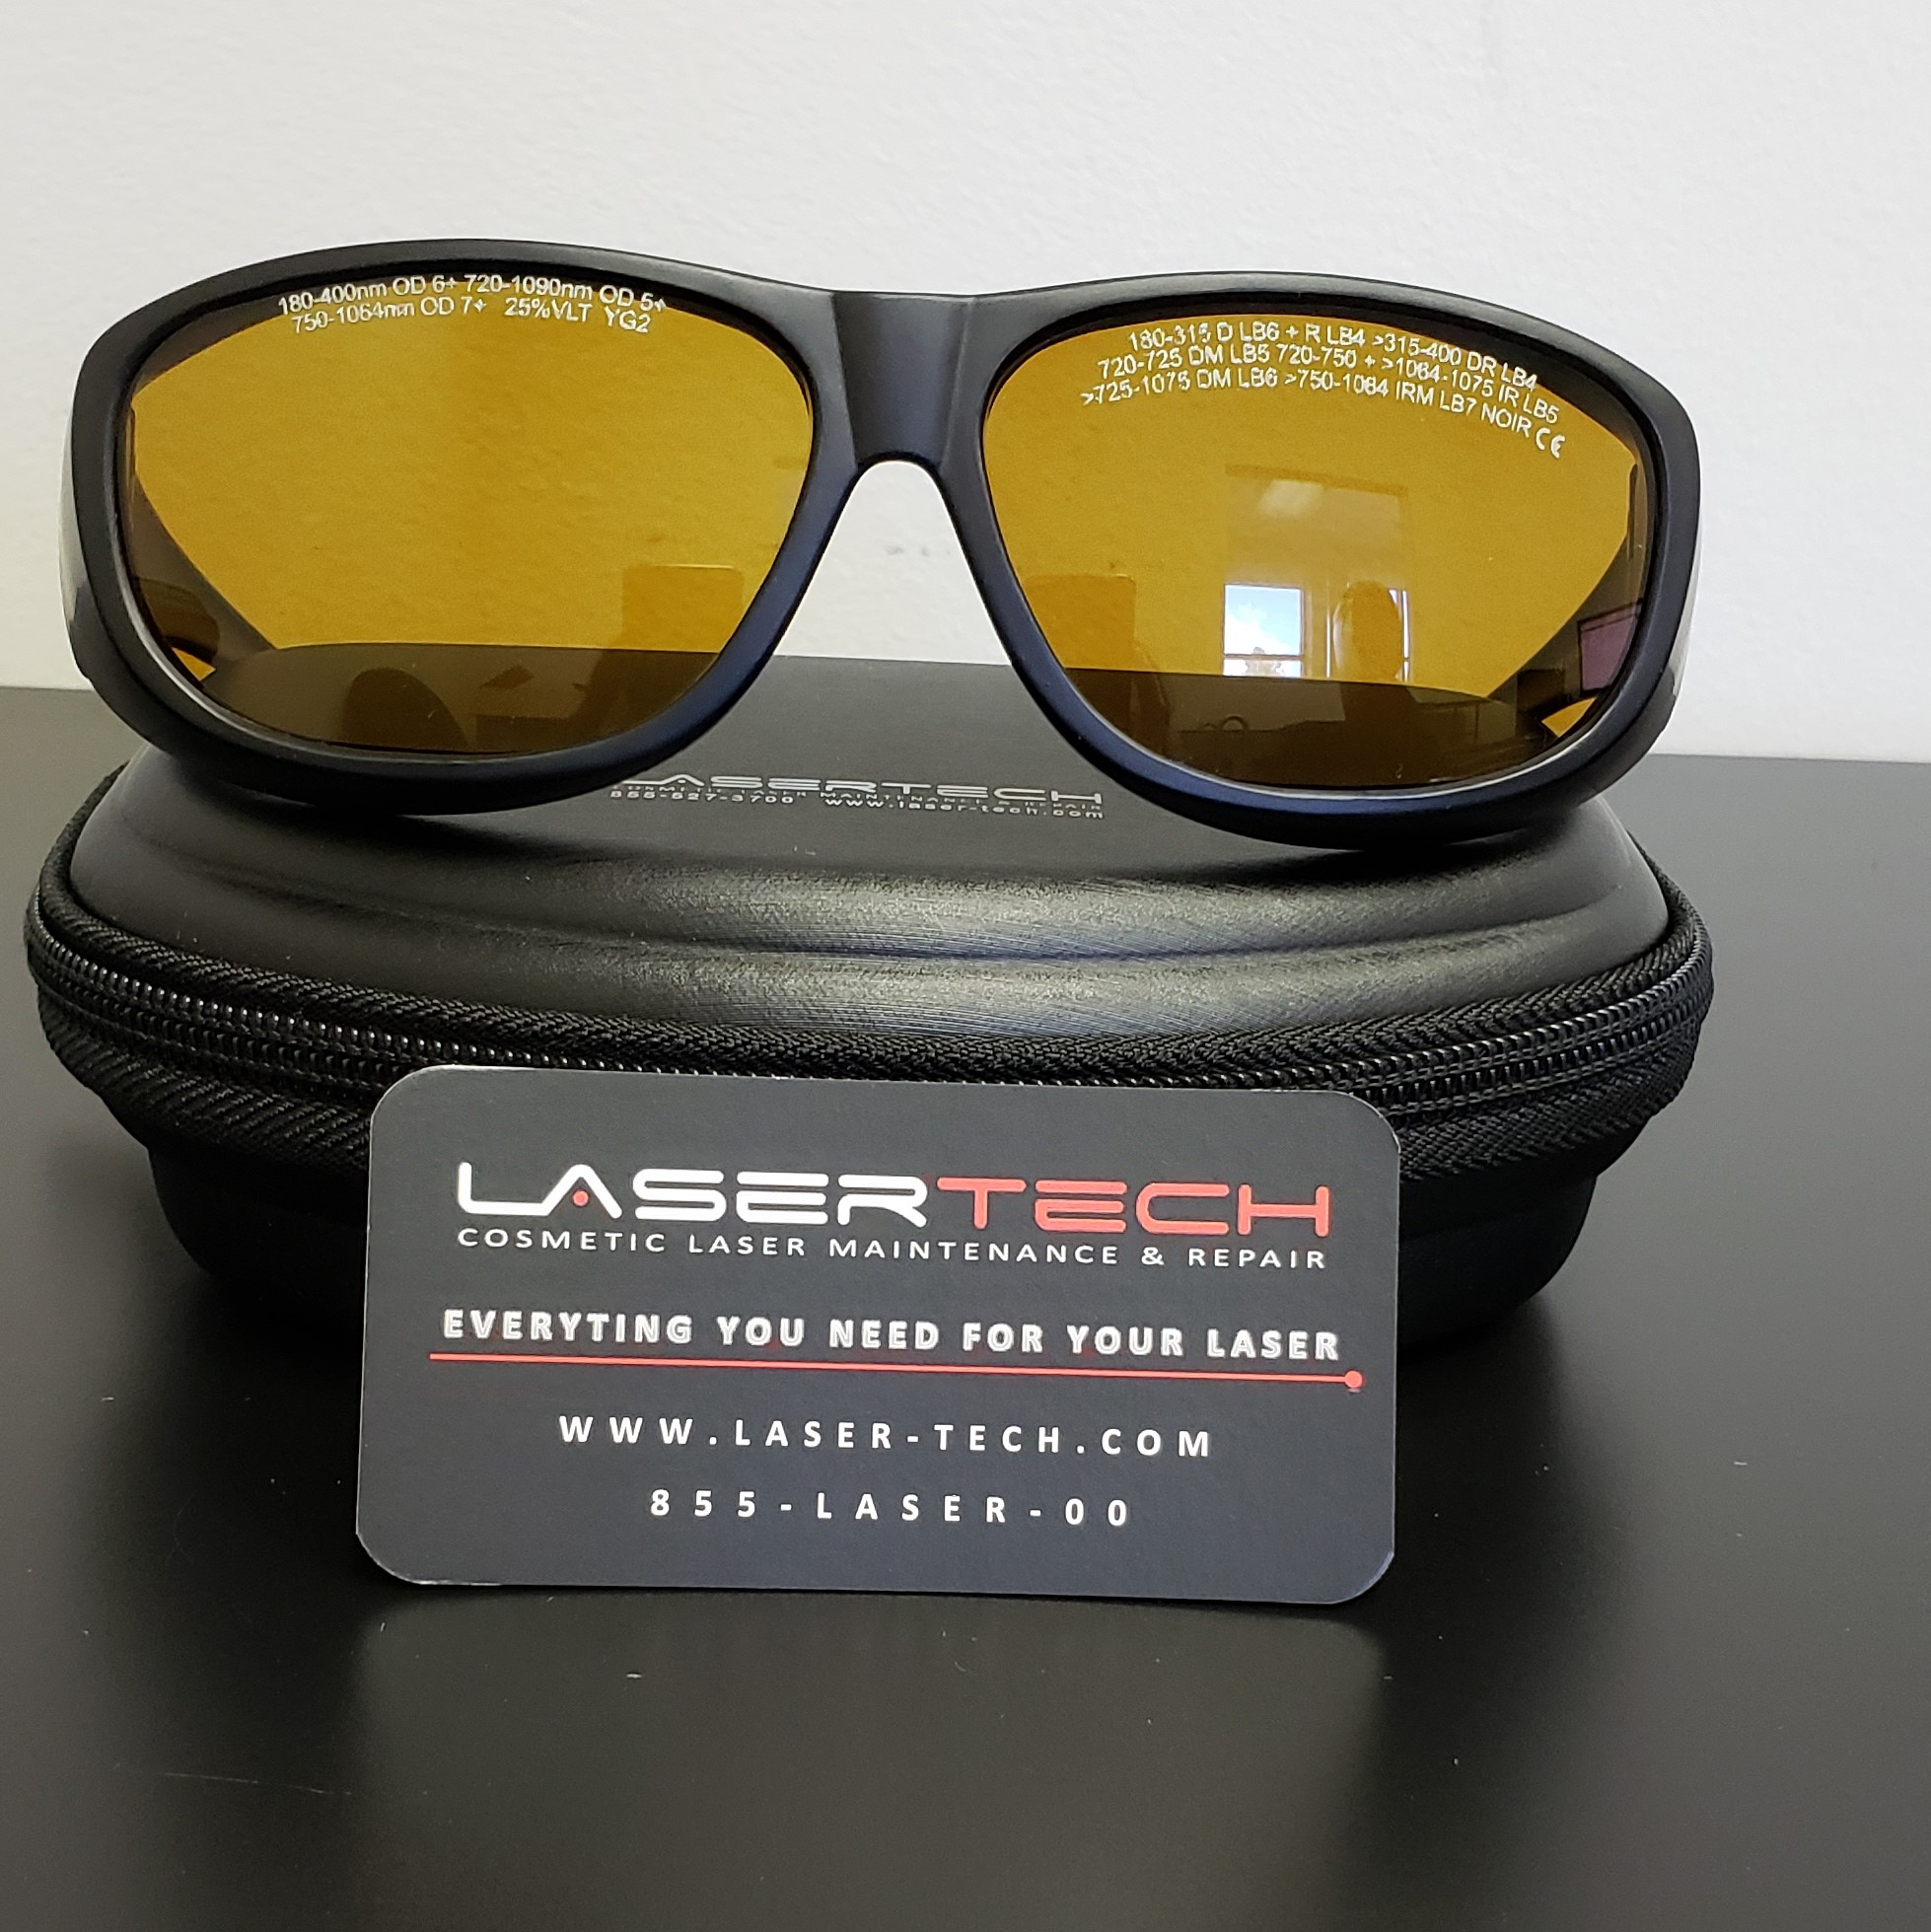 Laser Safety Glasses 740-850nm Alexandrite and Diode Eye Protection Goggles